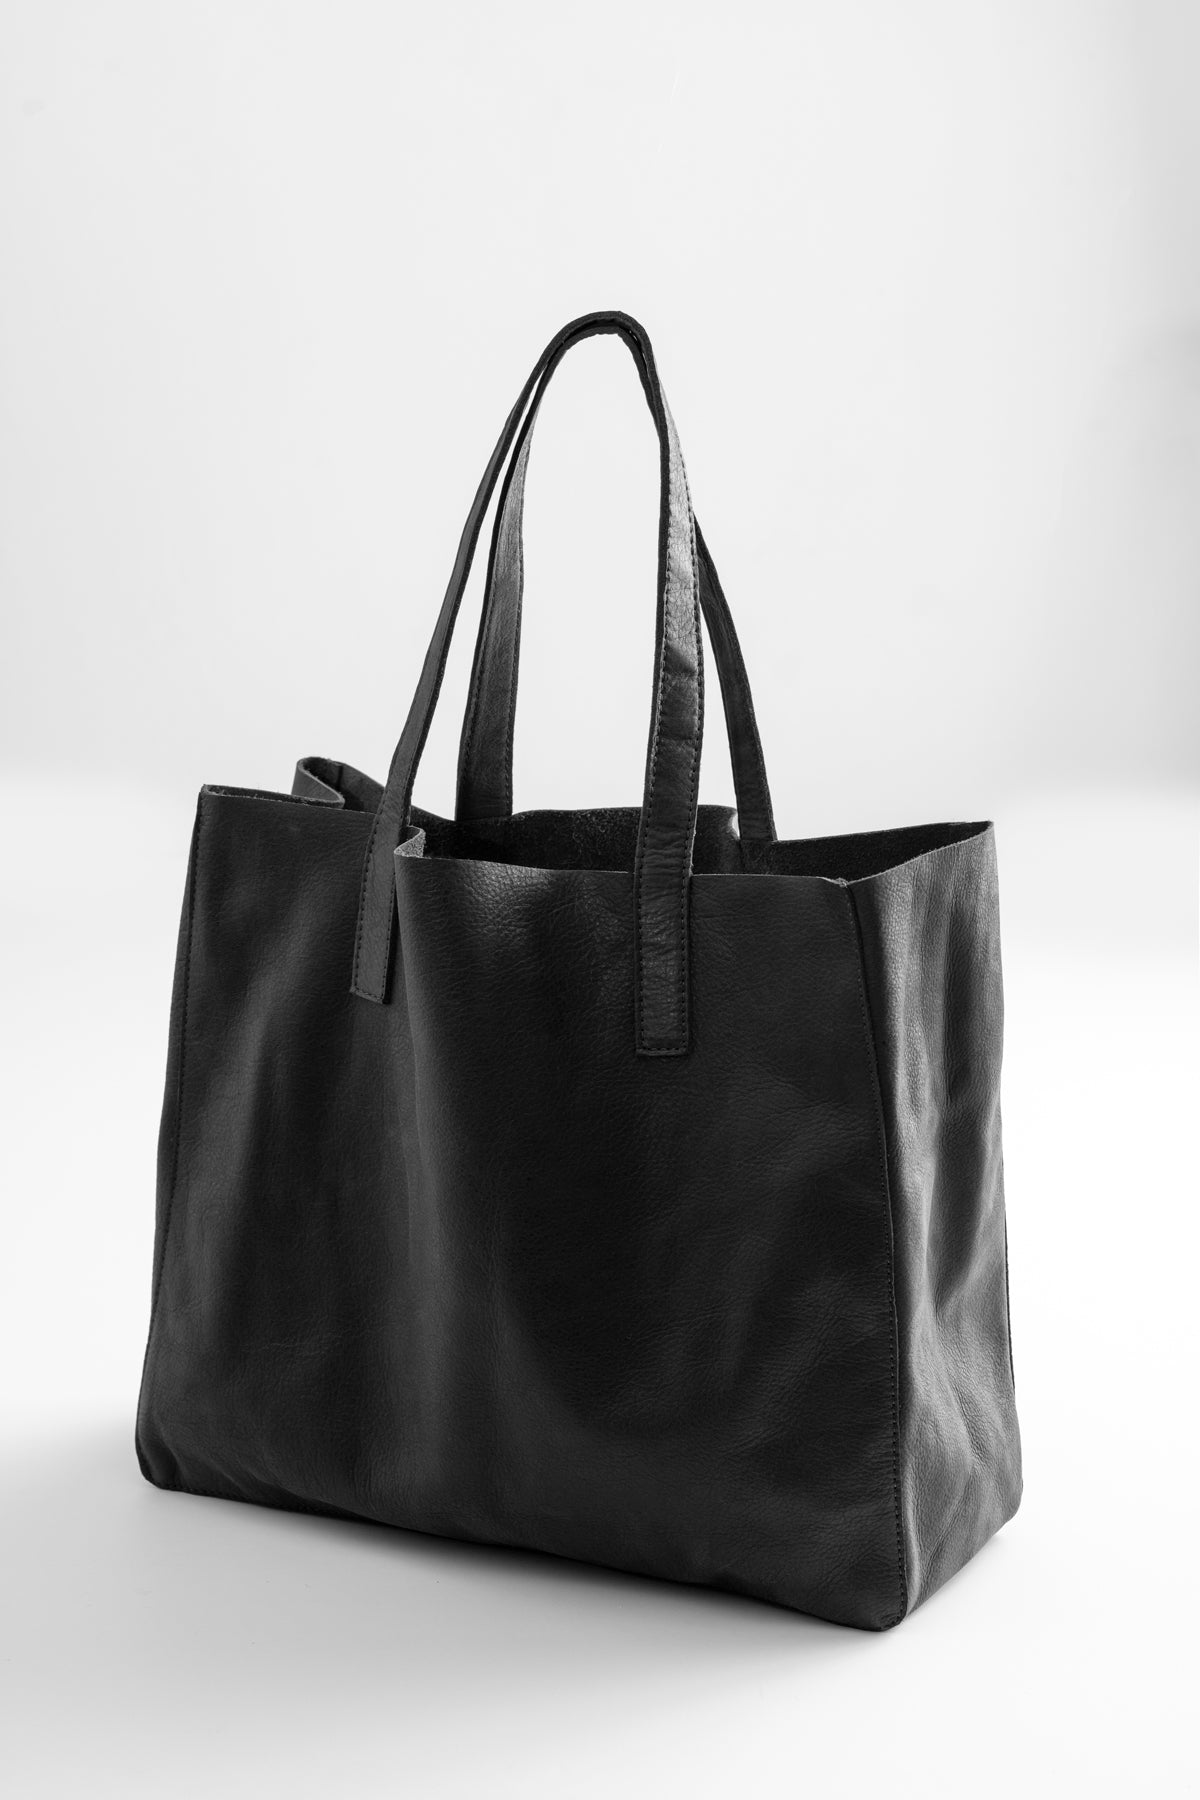   CLOVER LEATHER TOTE 